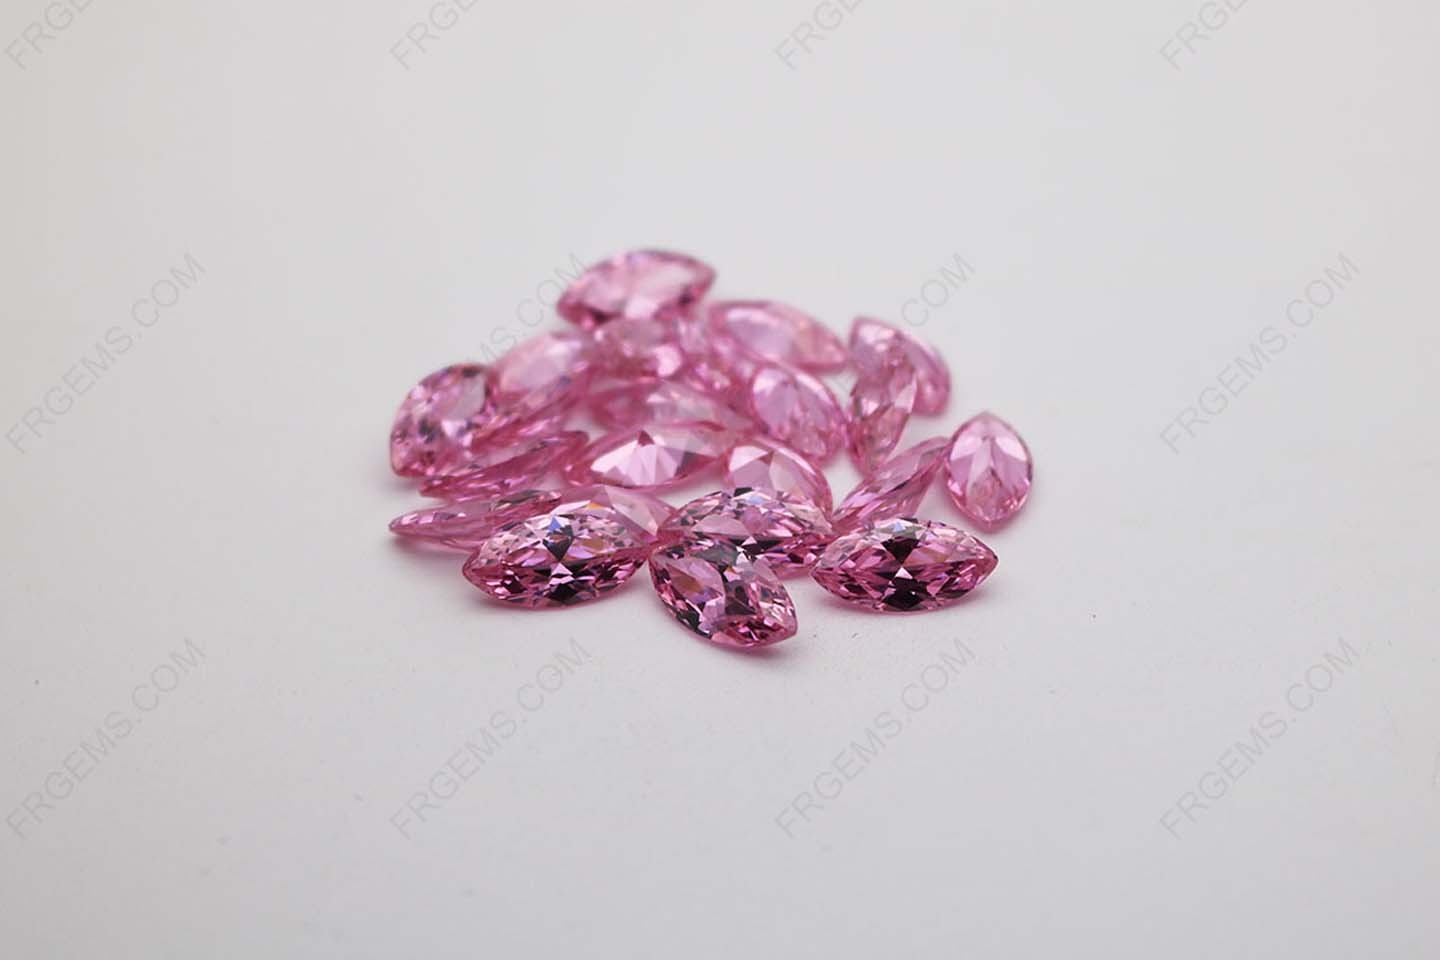 Cubic Zirconia Pink Marquise faceted cut 10x5mm stones CZ03 IMG_1229